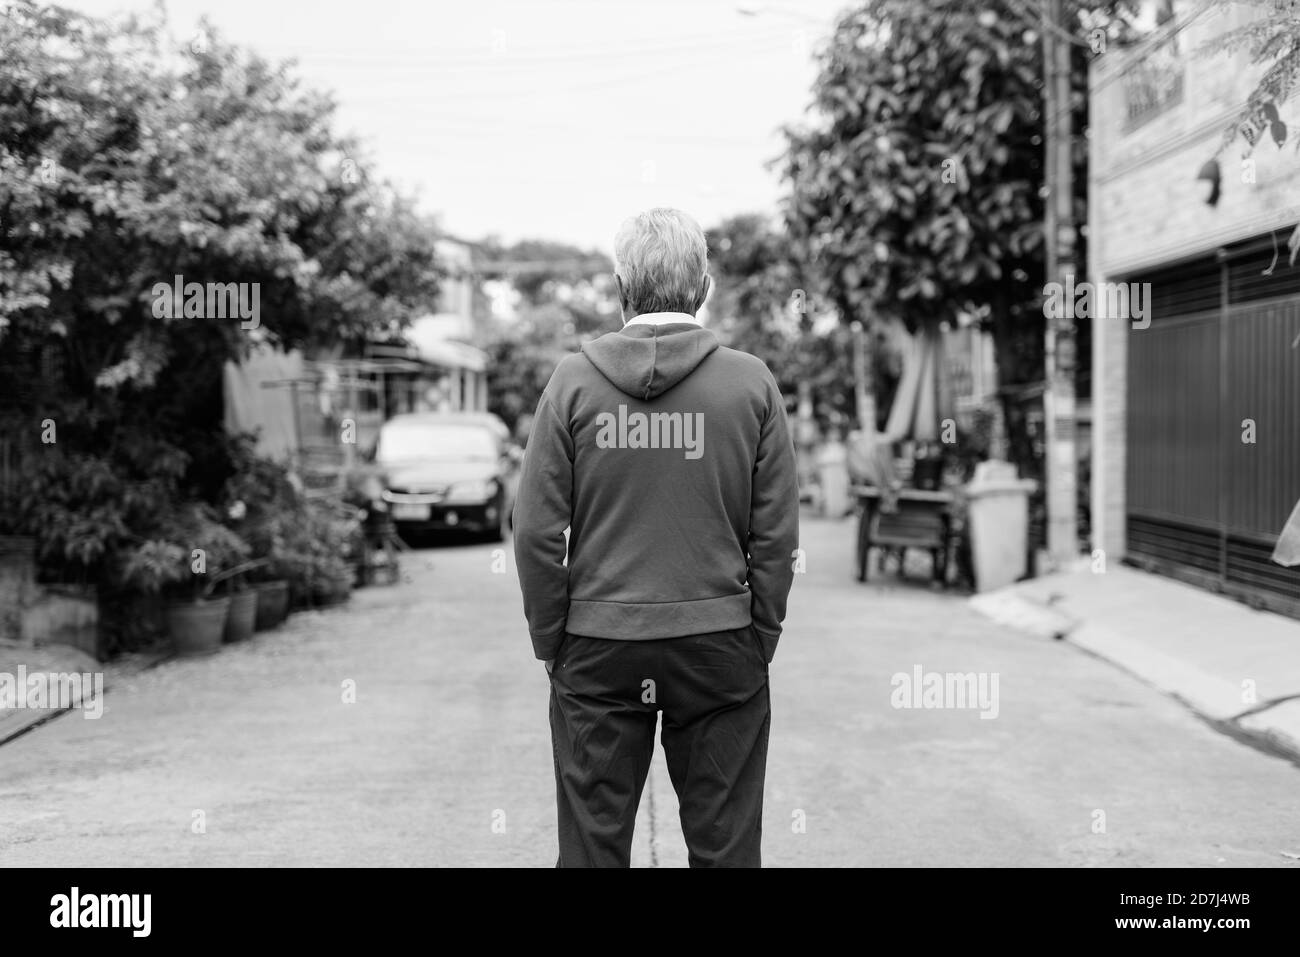 Back view of senior man standing while wearing jacket outdoors Stock Photo